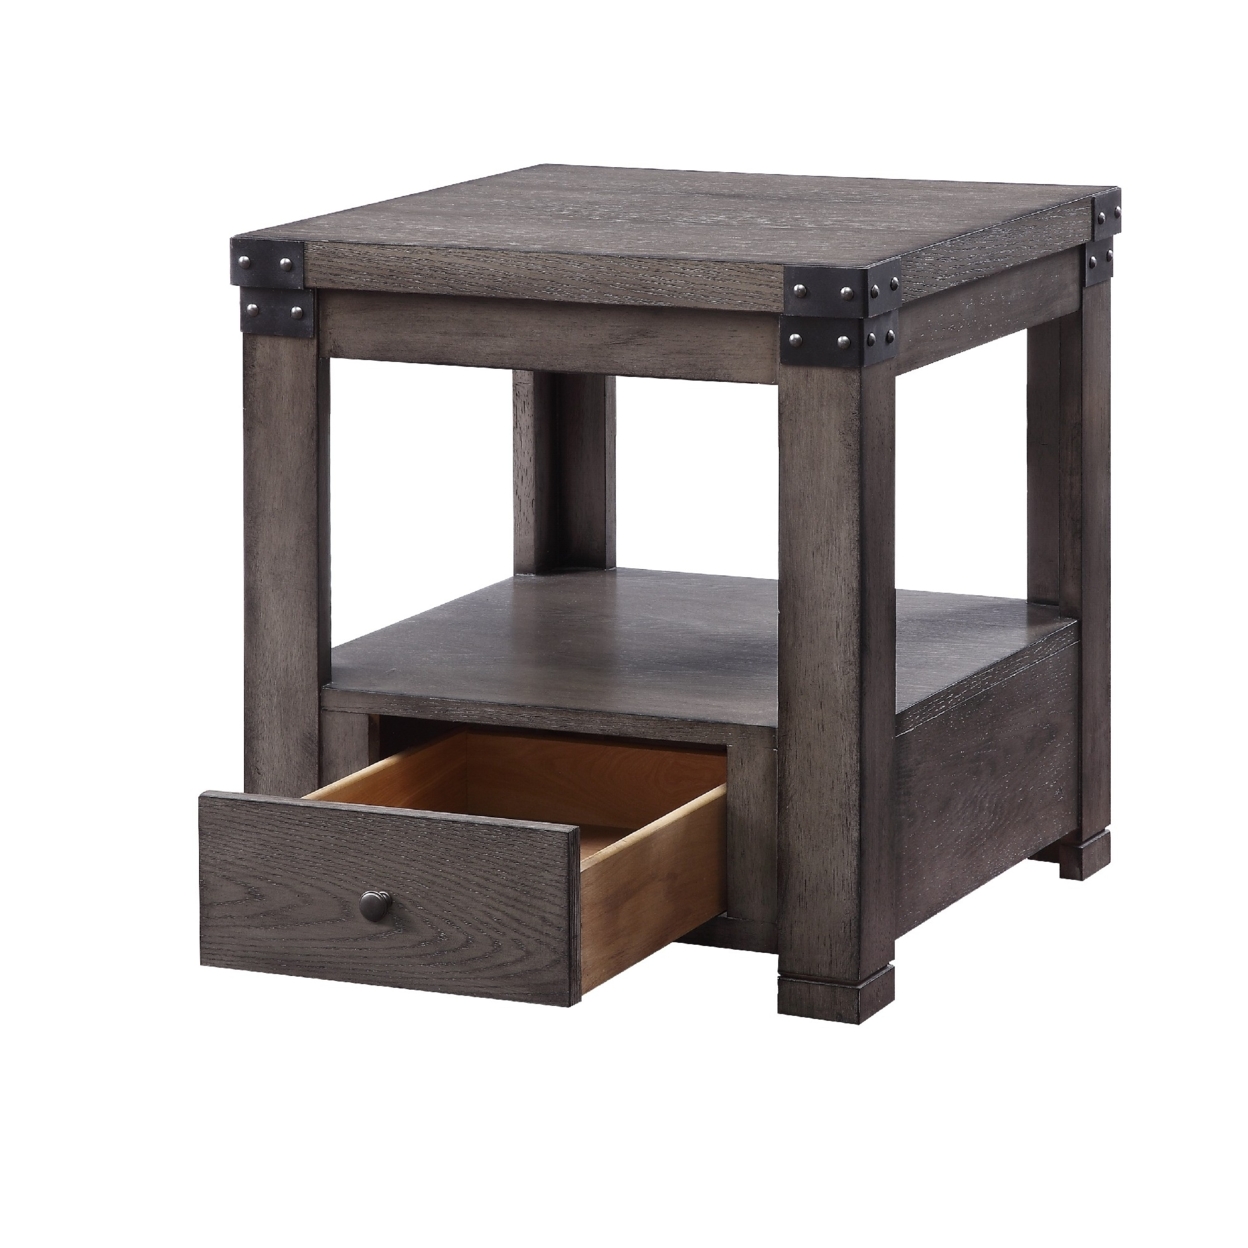 Wooden End Table With Open Bottom Shelf And One Drawer, Gray- Saltoro Sherpi